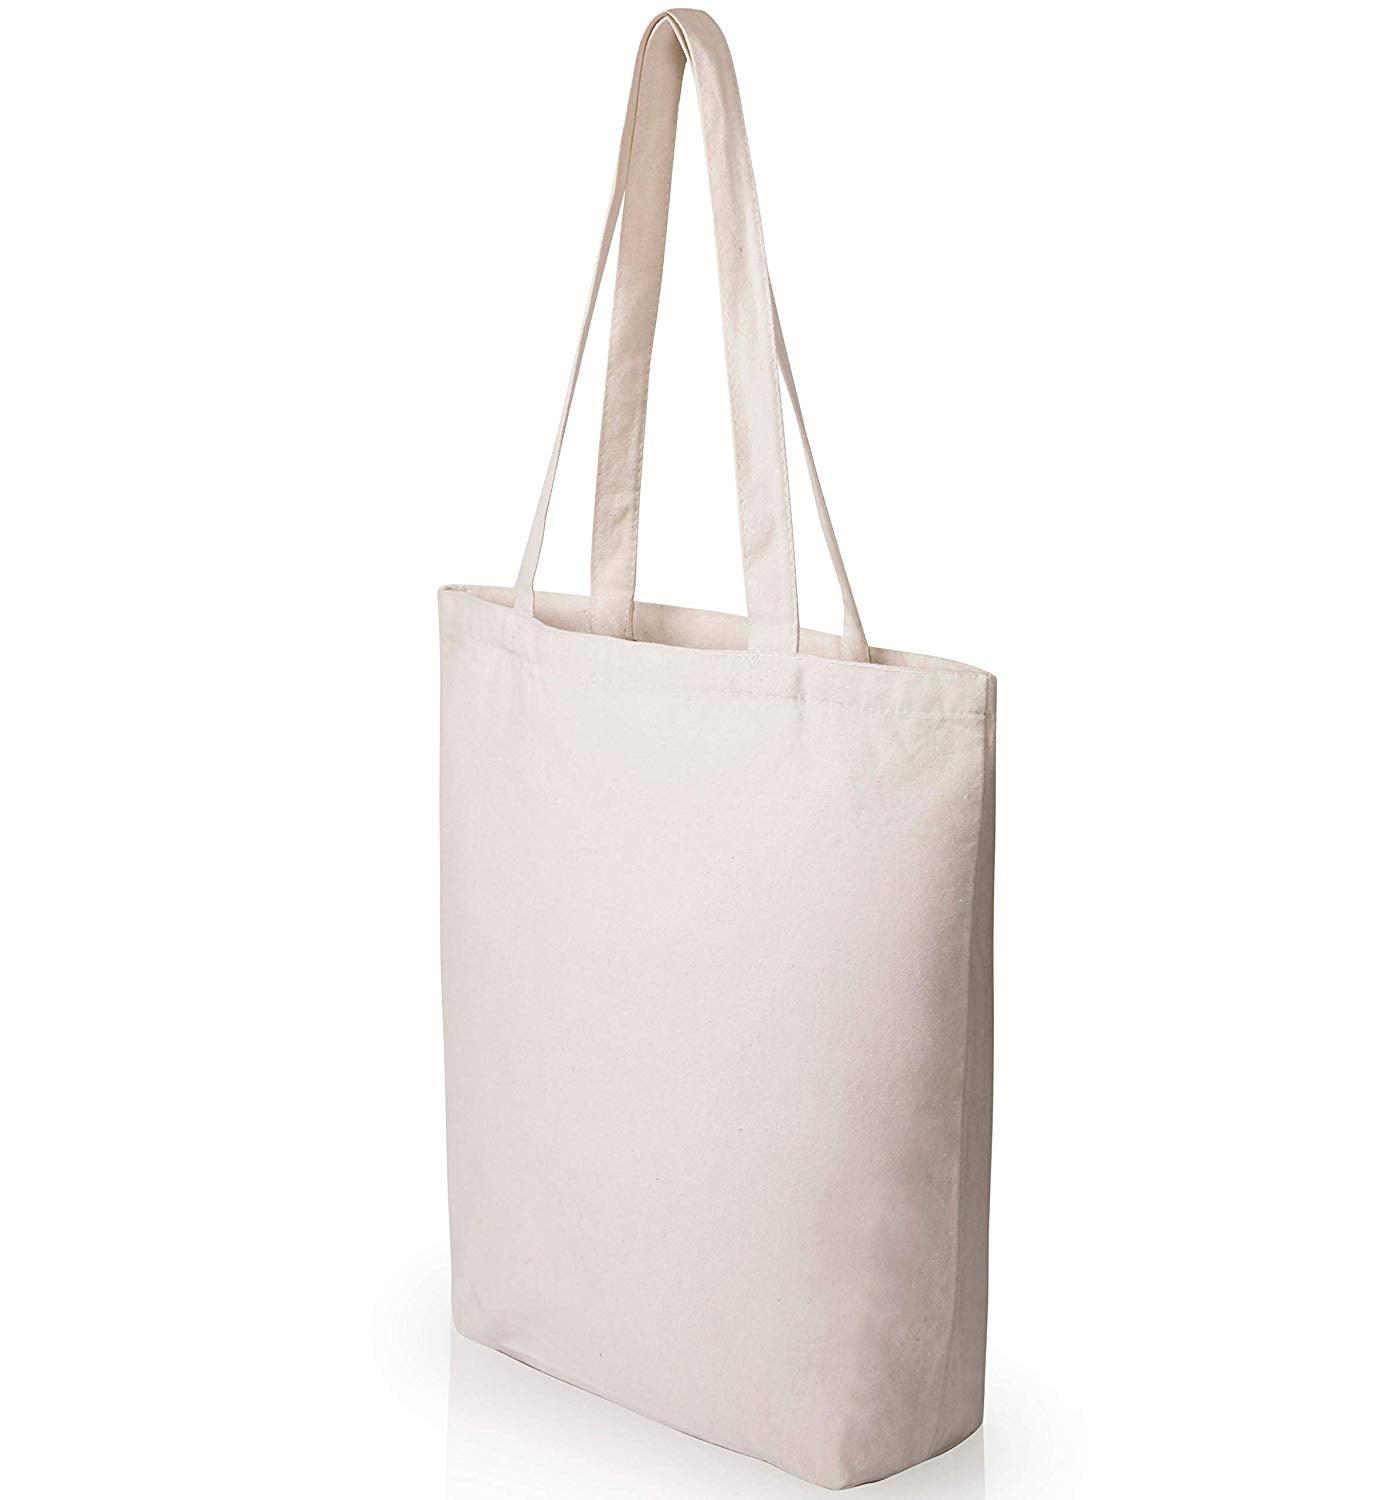 Sweetude 10 Pieces Canvas Tote Bag Large Heavy Duty Blank Canvas